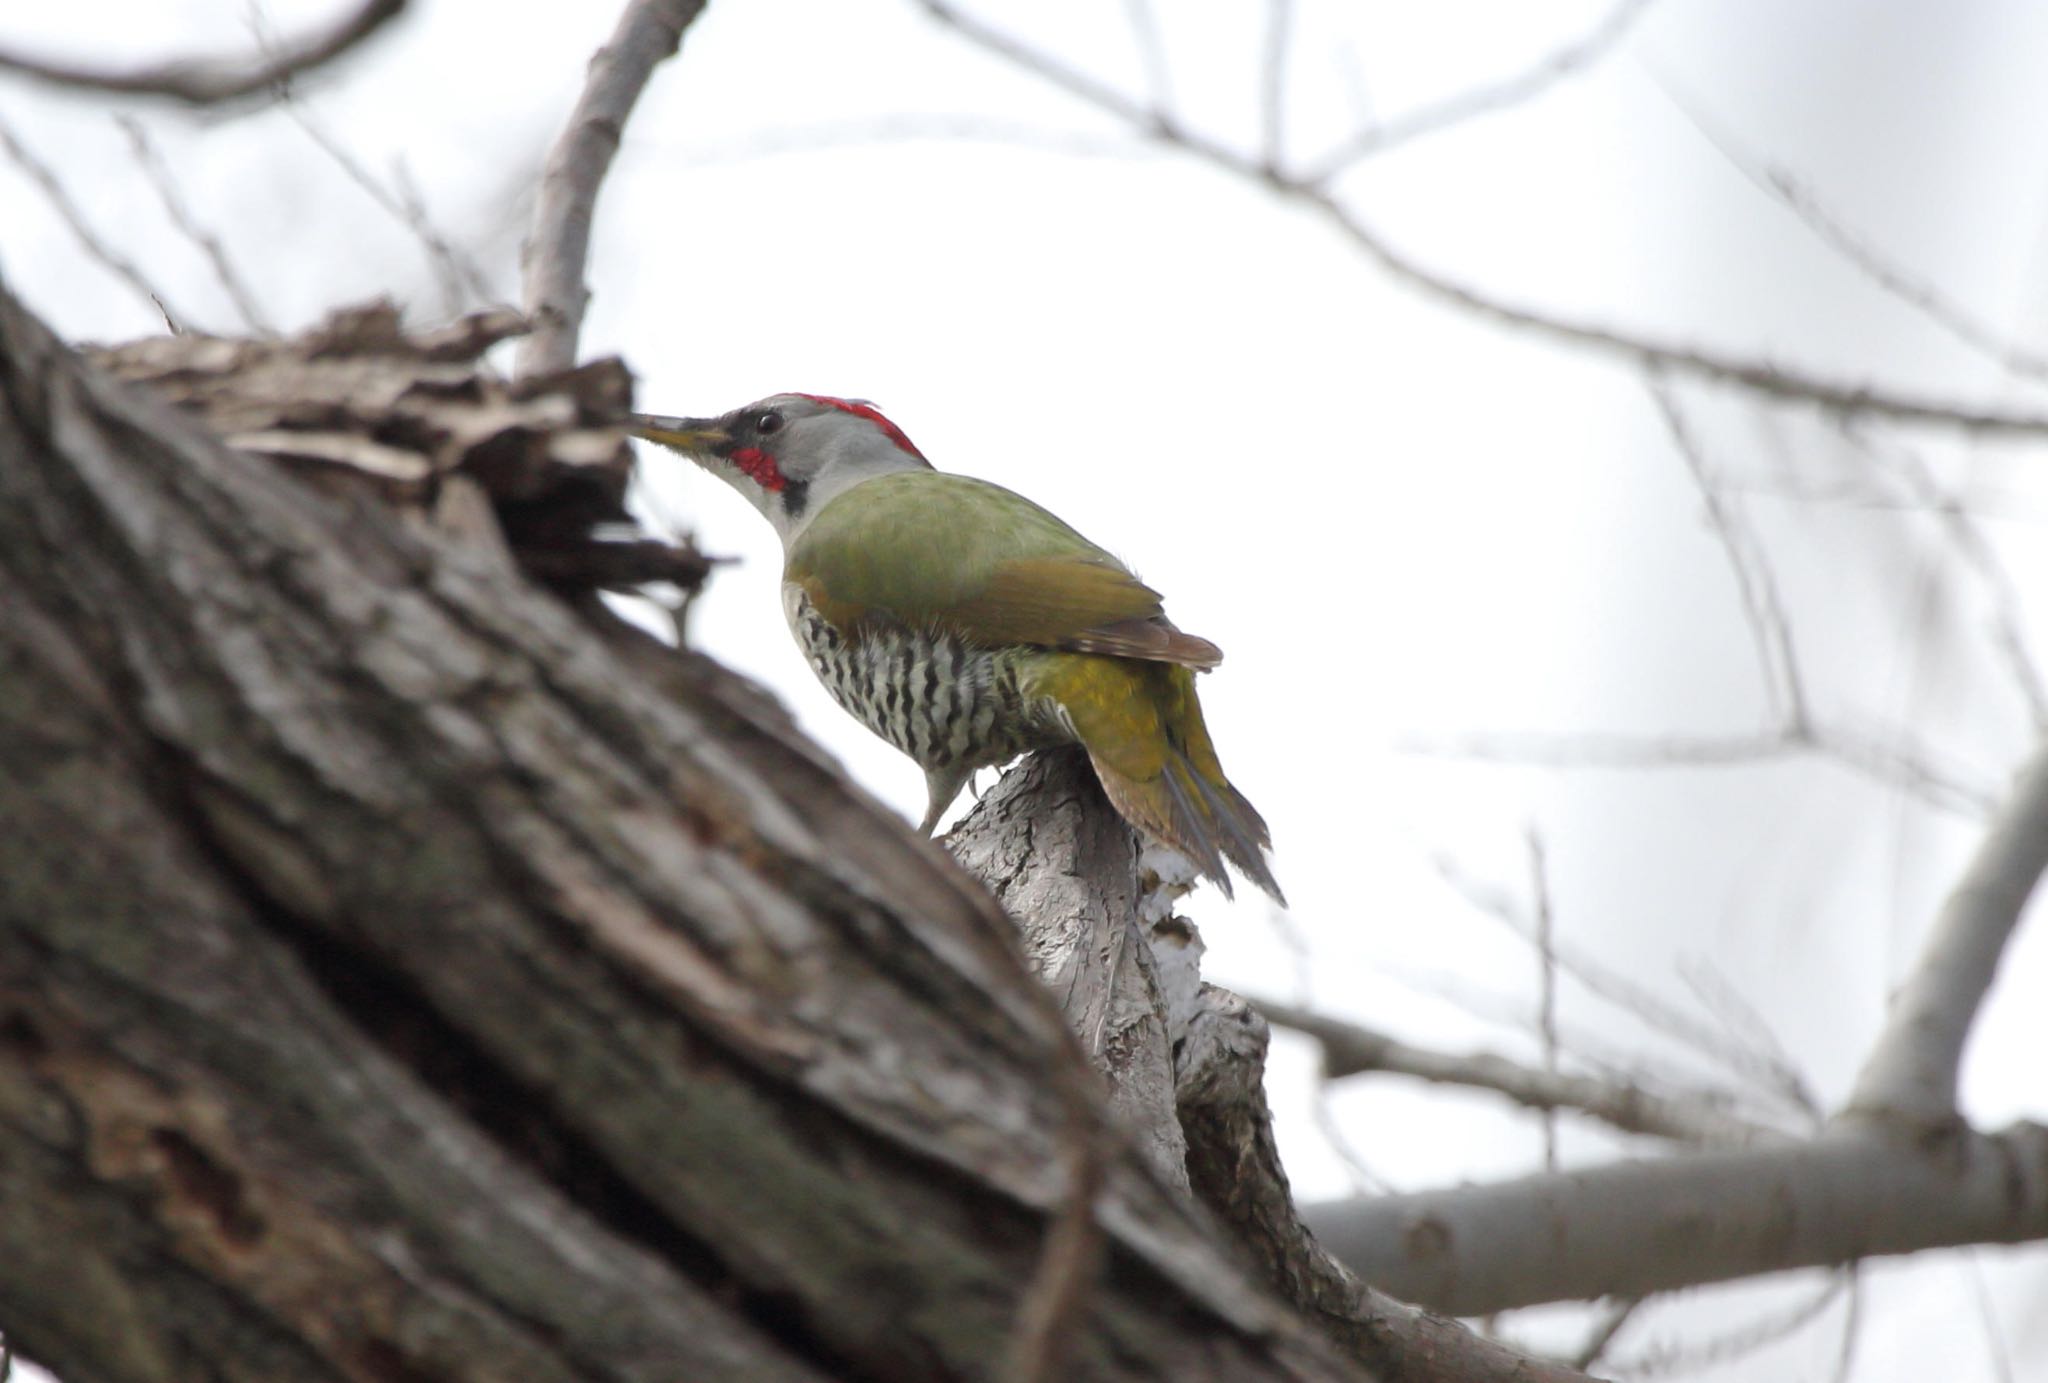 Photo of Japanese Green Woodpecker at 姉川河口公園 by アカウント12570